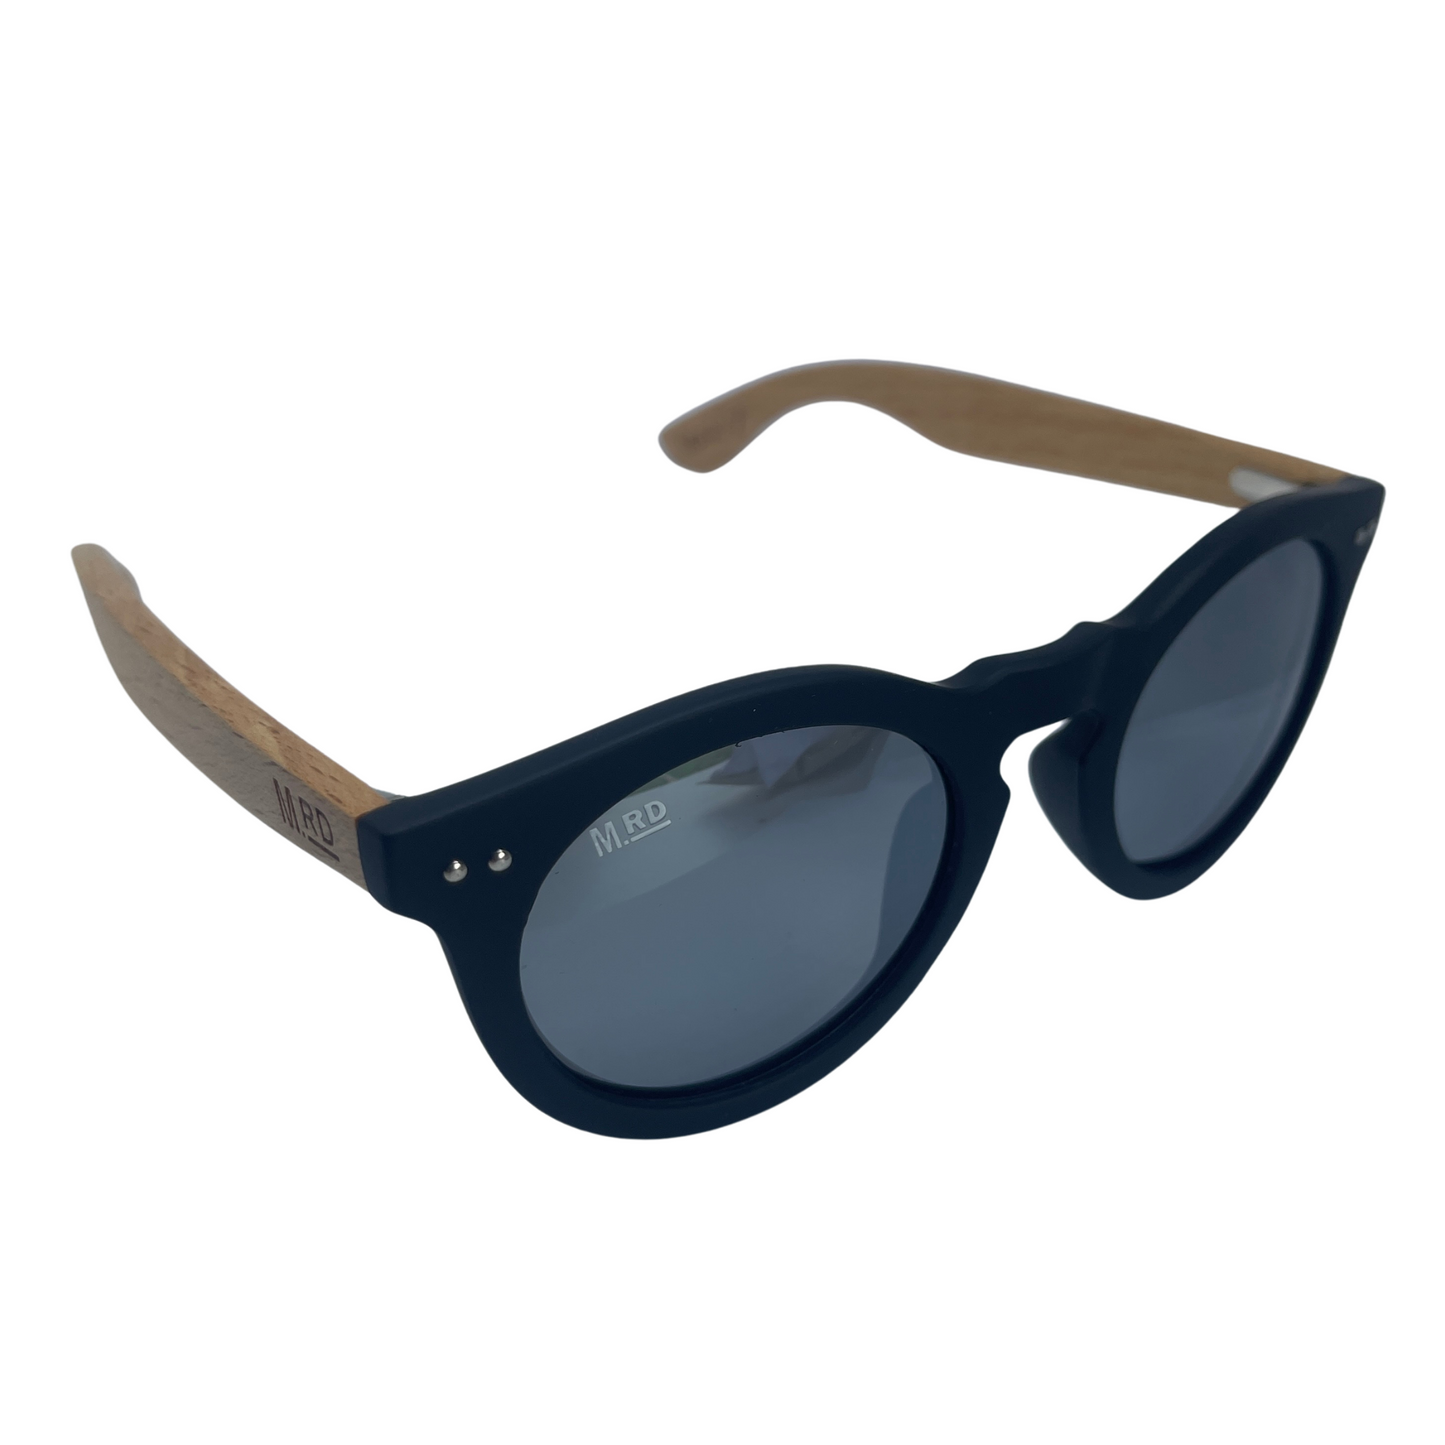 Womens sunglasses with black frames, wooden arms and silver reflective lenses in a Grace Kelly style.